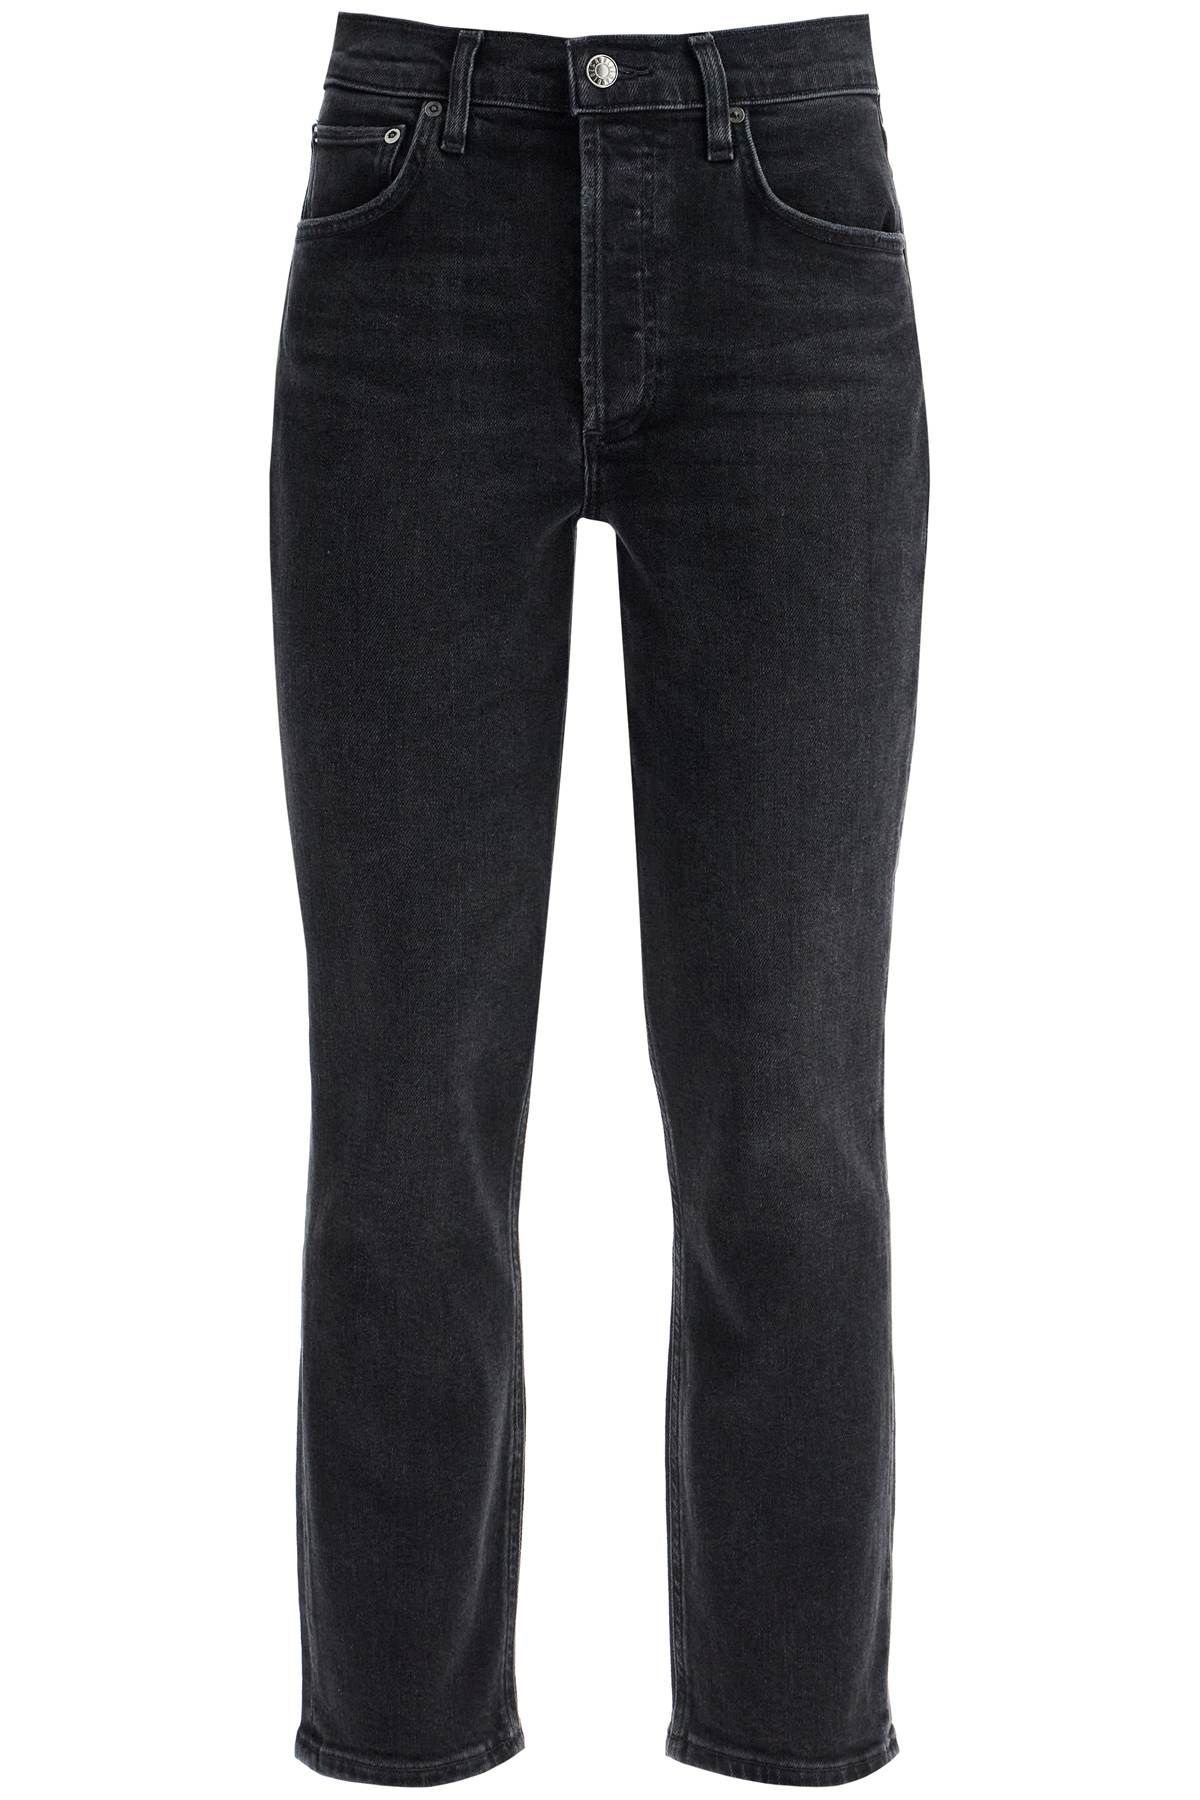 AGOLDE AGOLDE cropped riley jeans by